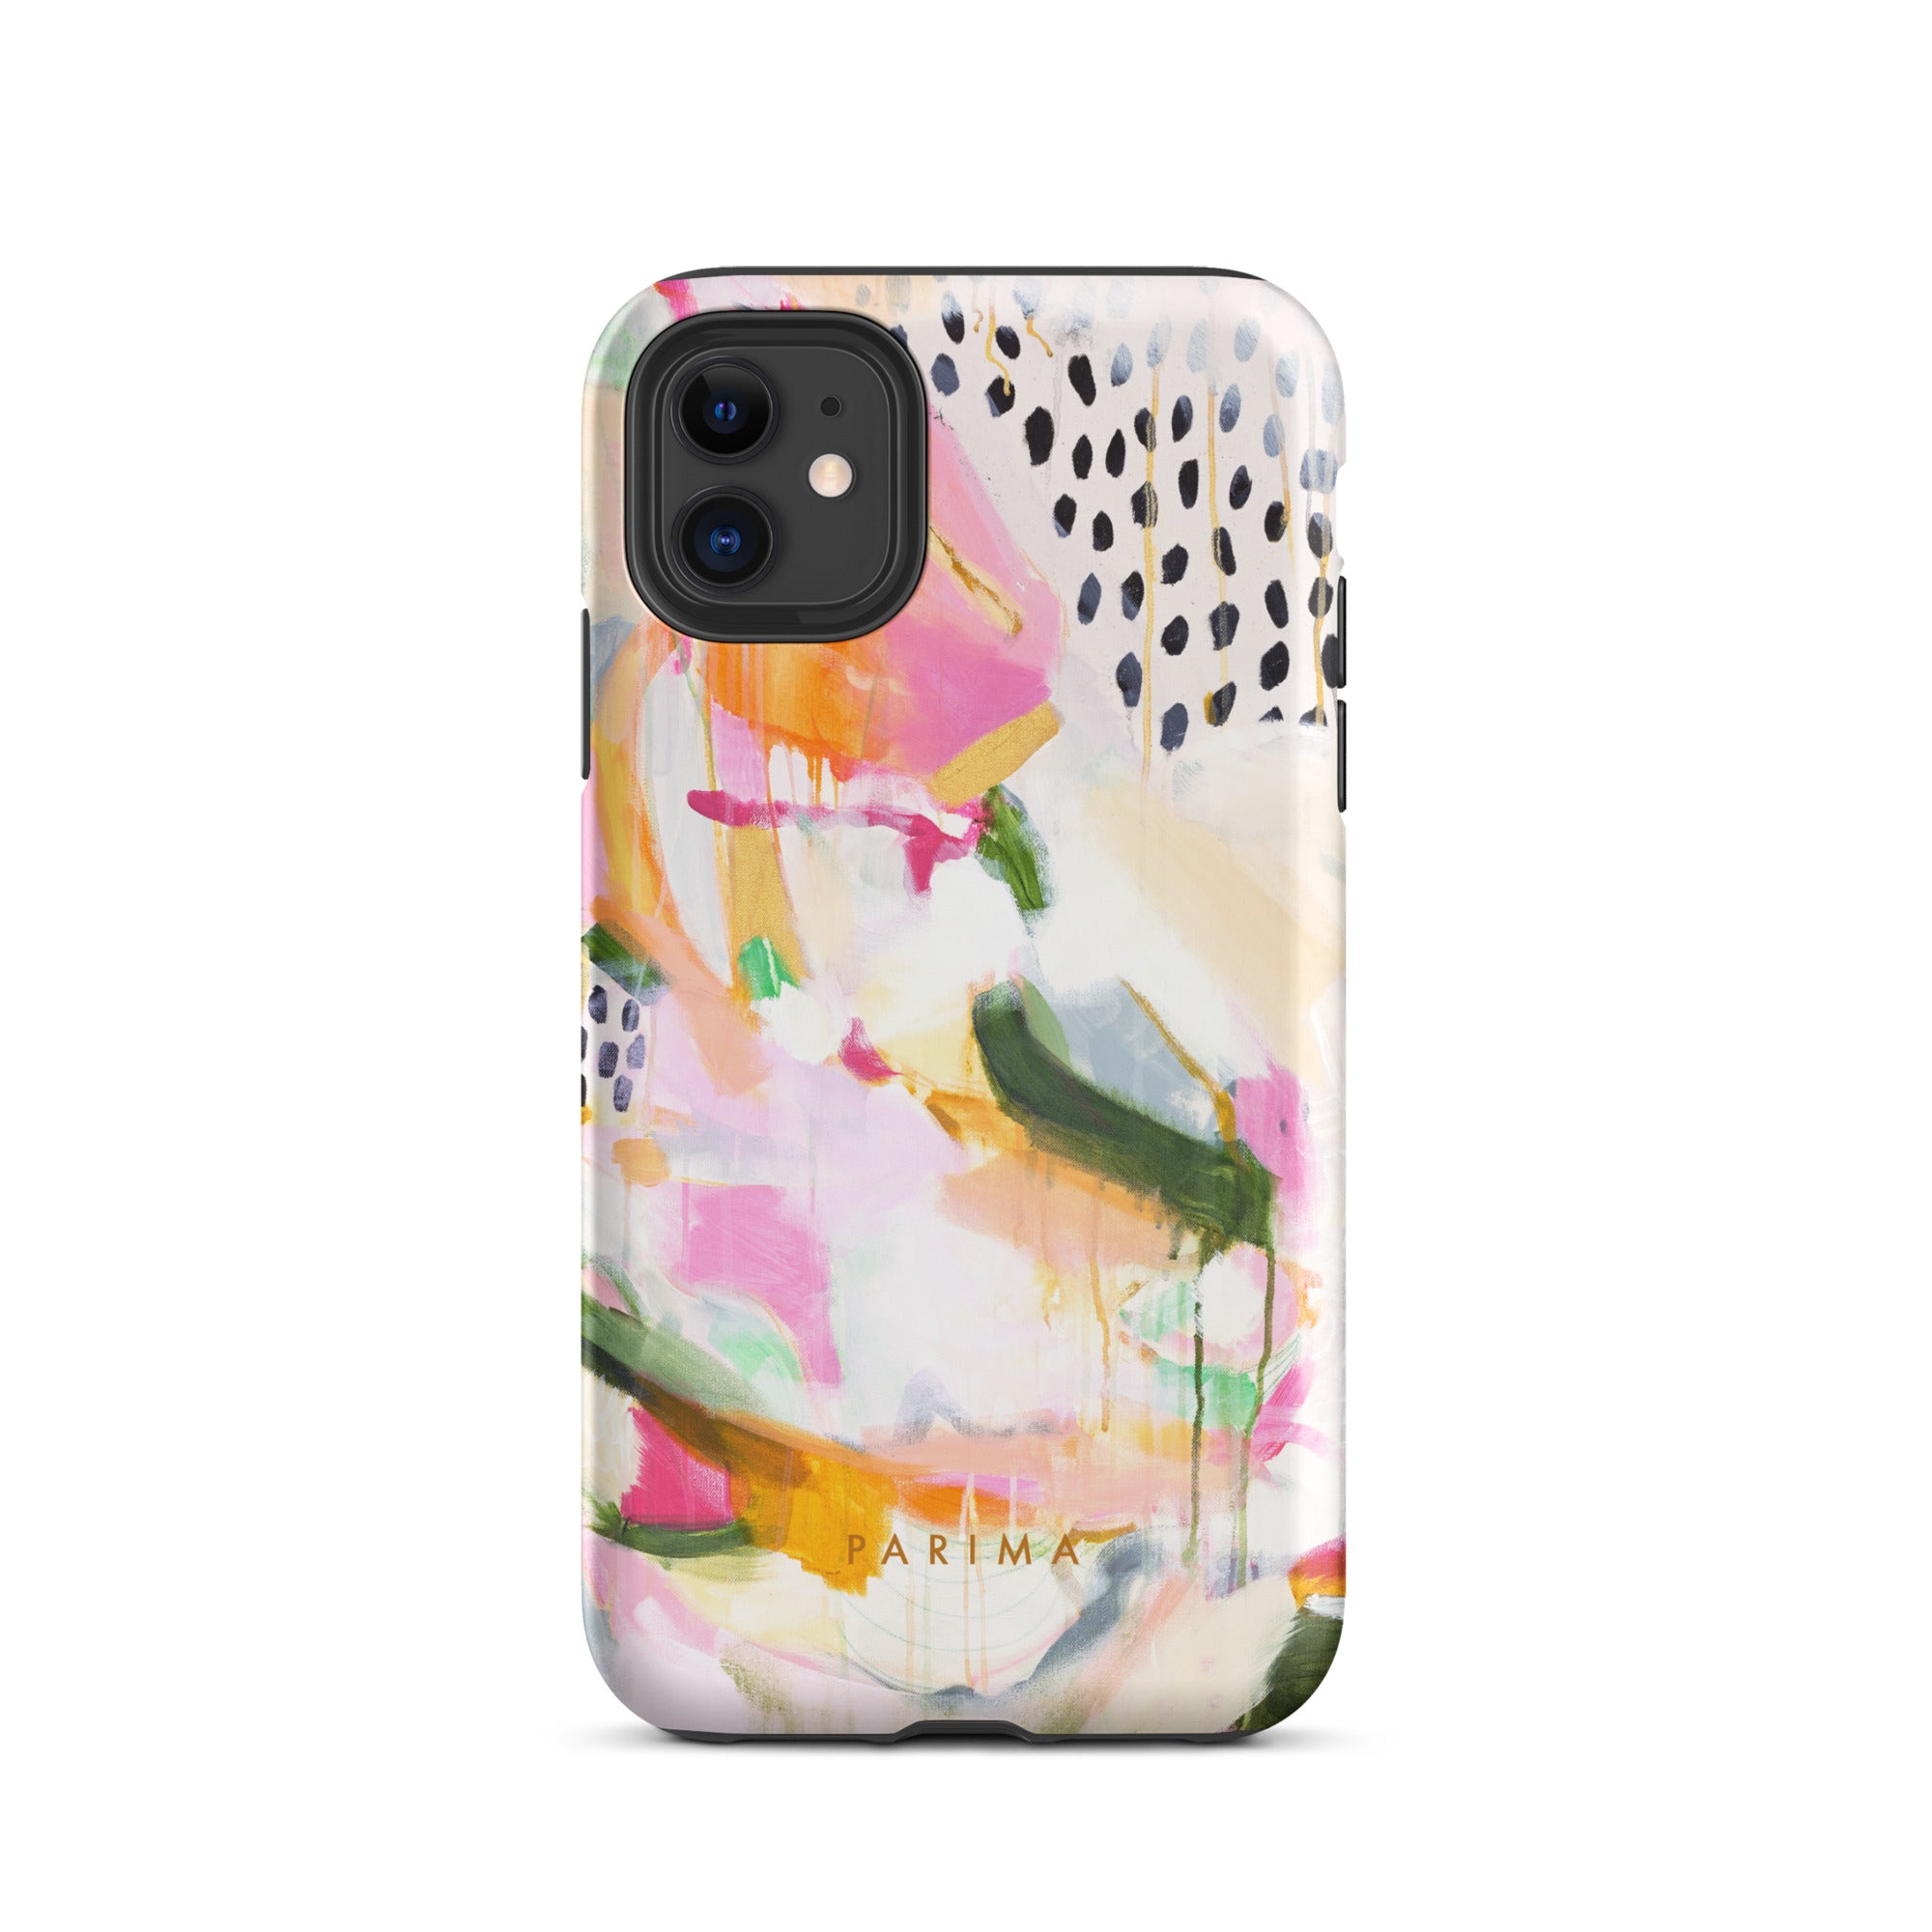 Adira, pink and green abstract art - iPhone 11 tough case by Parima Studio